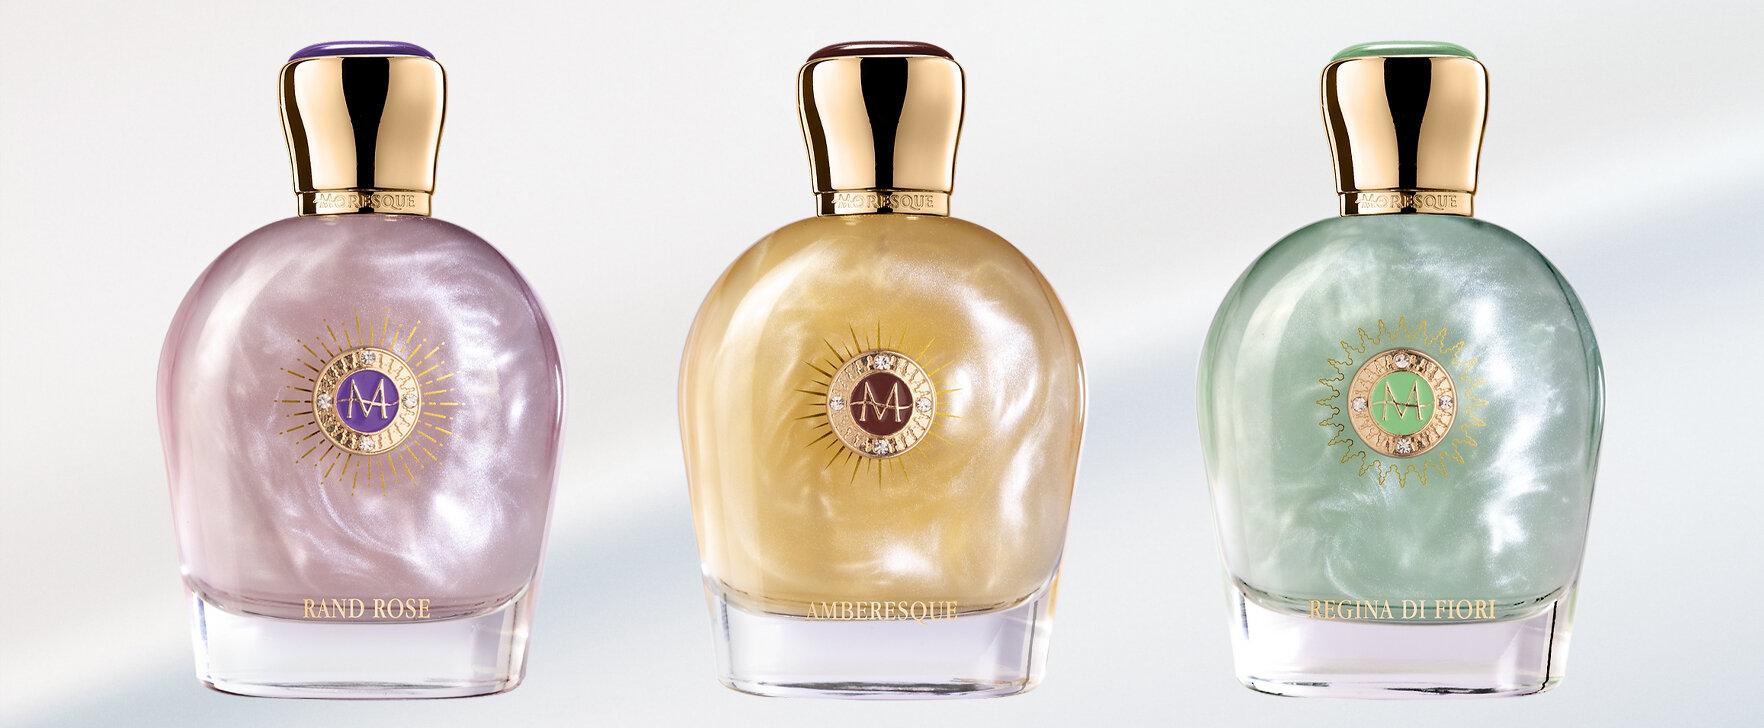 "The Art of Bend": The New Fragrance Collection From Moresque